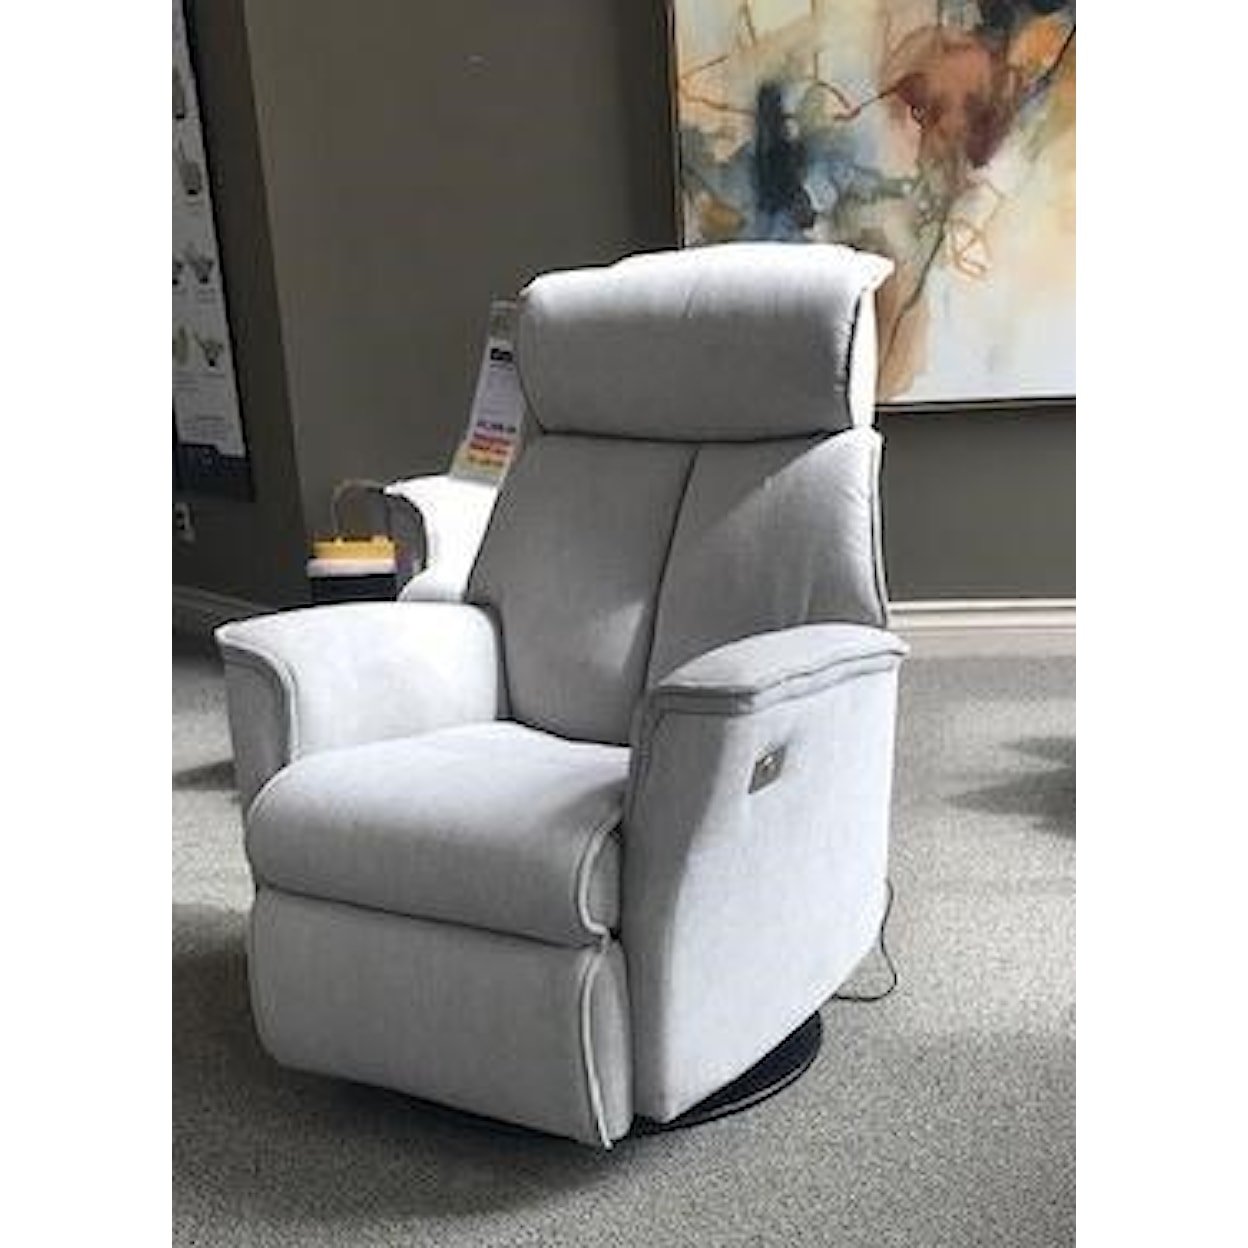 IMG Norway BOSS Standard Power Recliner with Lock